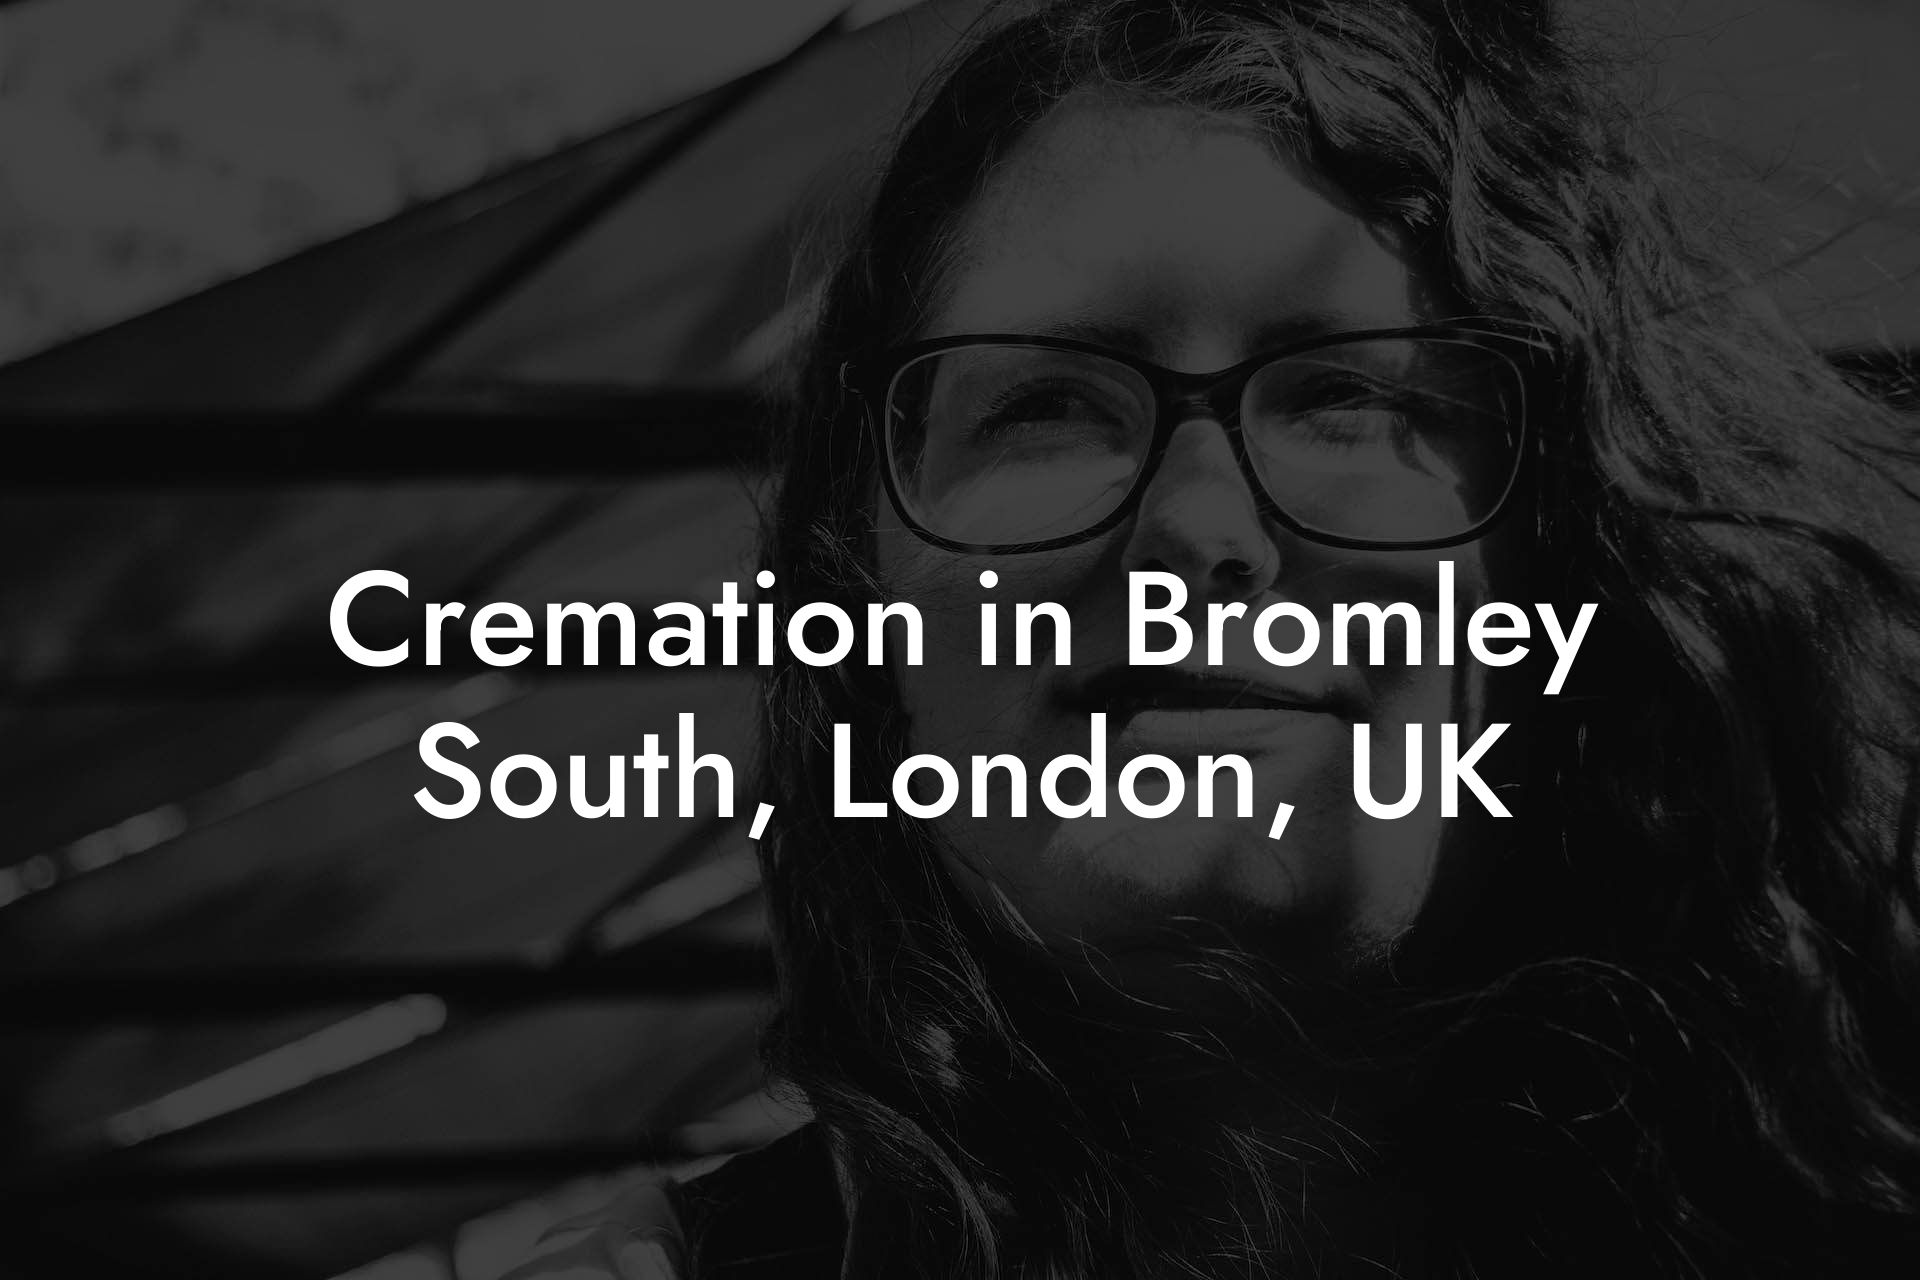 Cremation in Bromley South, London, UK